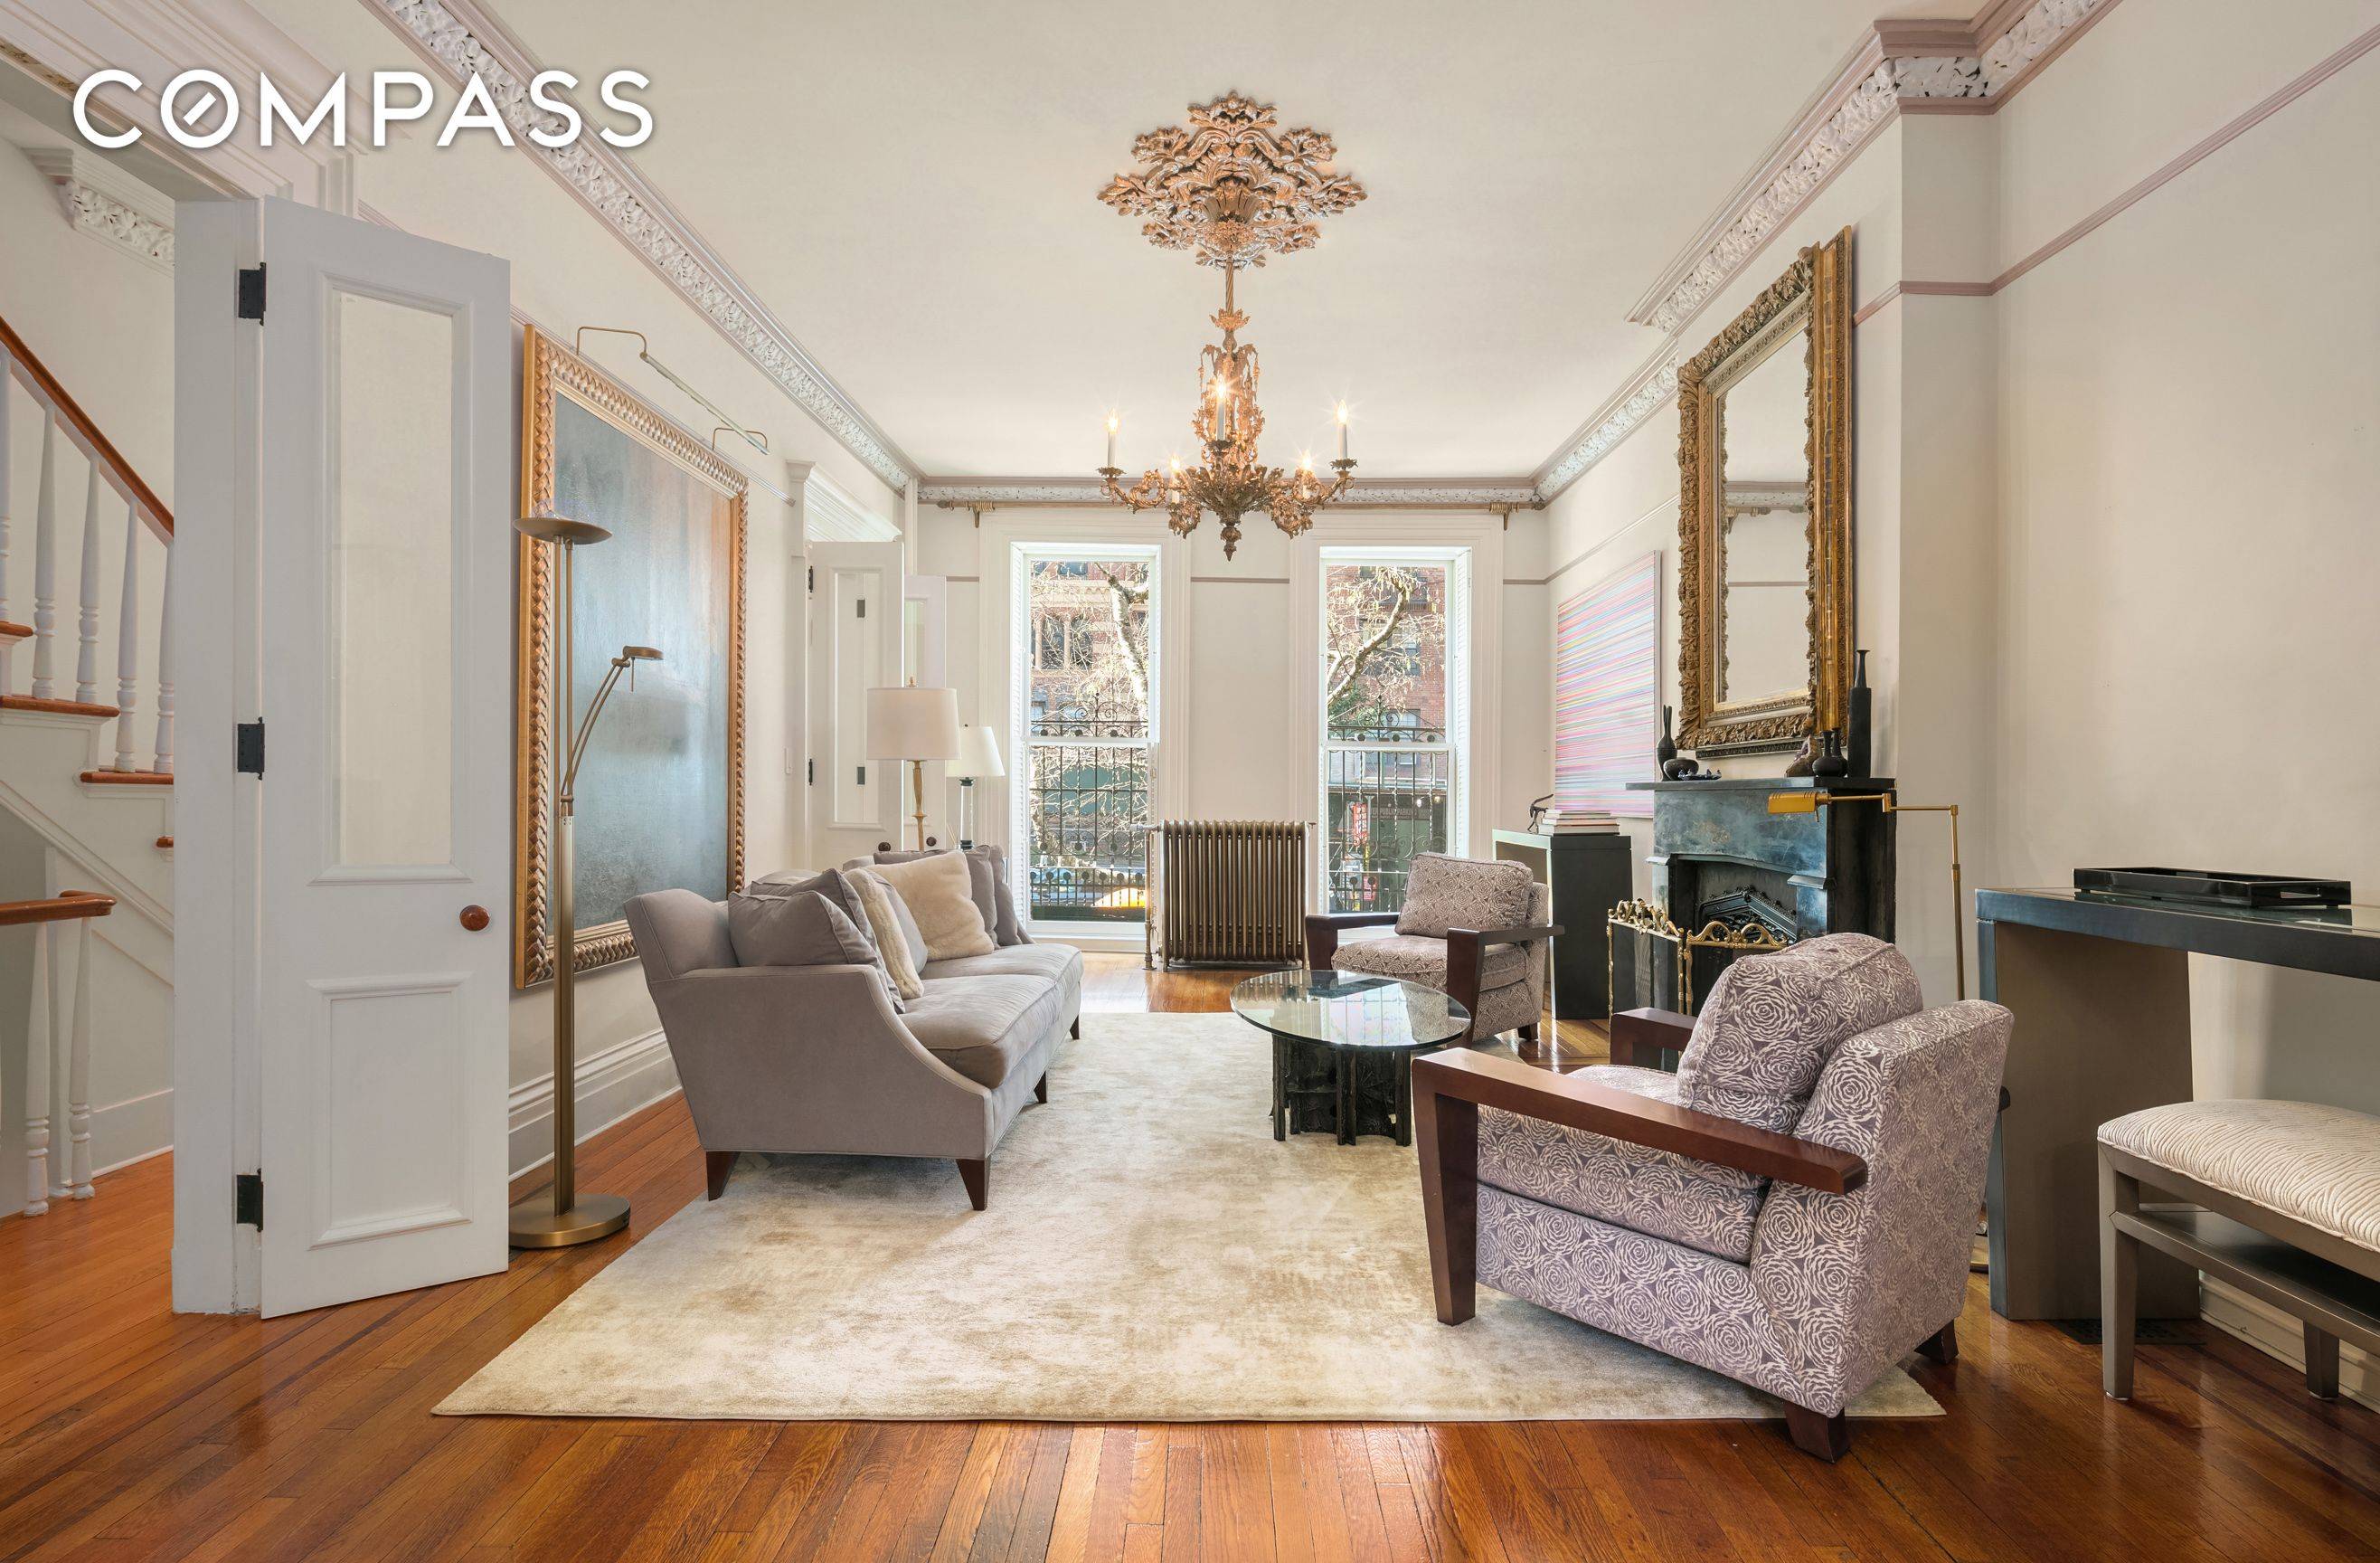 Set behind a rare and beautifully planted front garden, a historic stoop leads one up into the impeccably preserved interiors of this 21 foot wide, Greek Revival single family townhouse ...